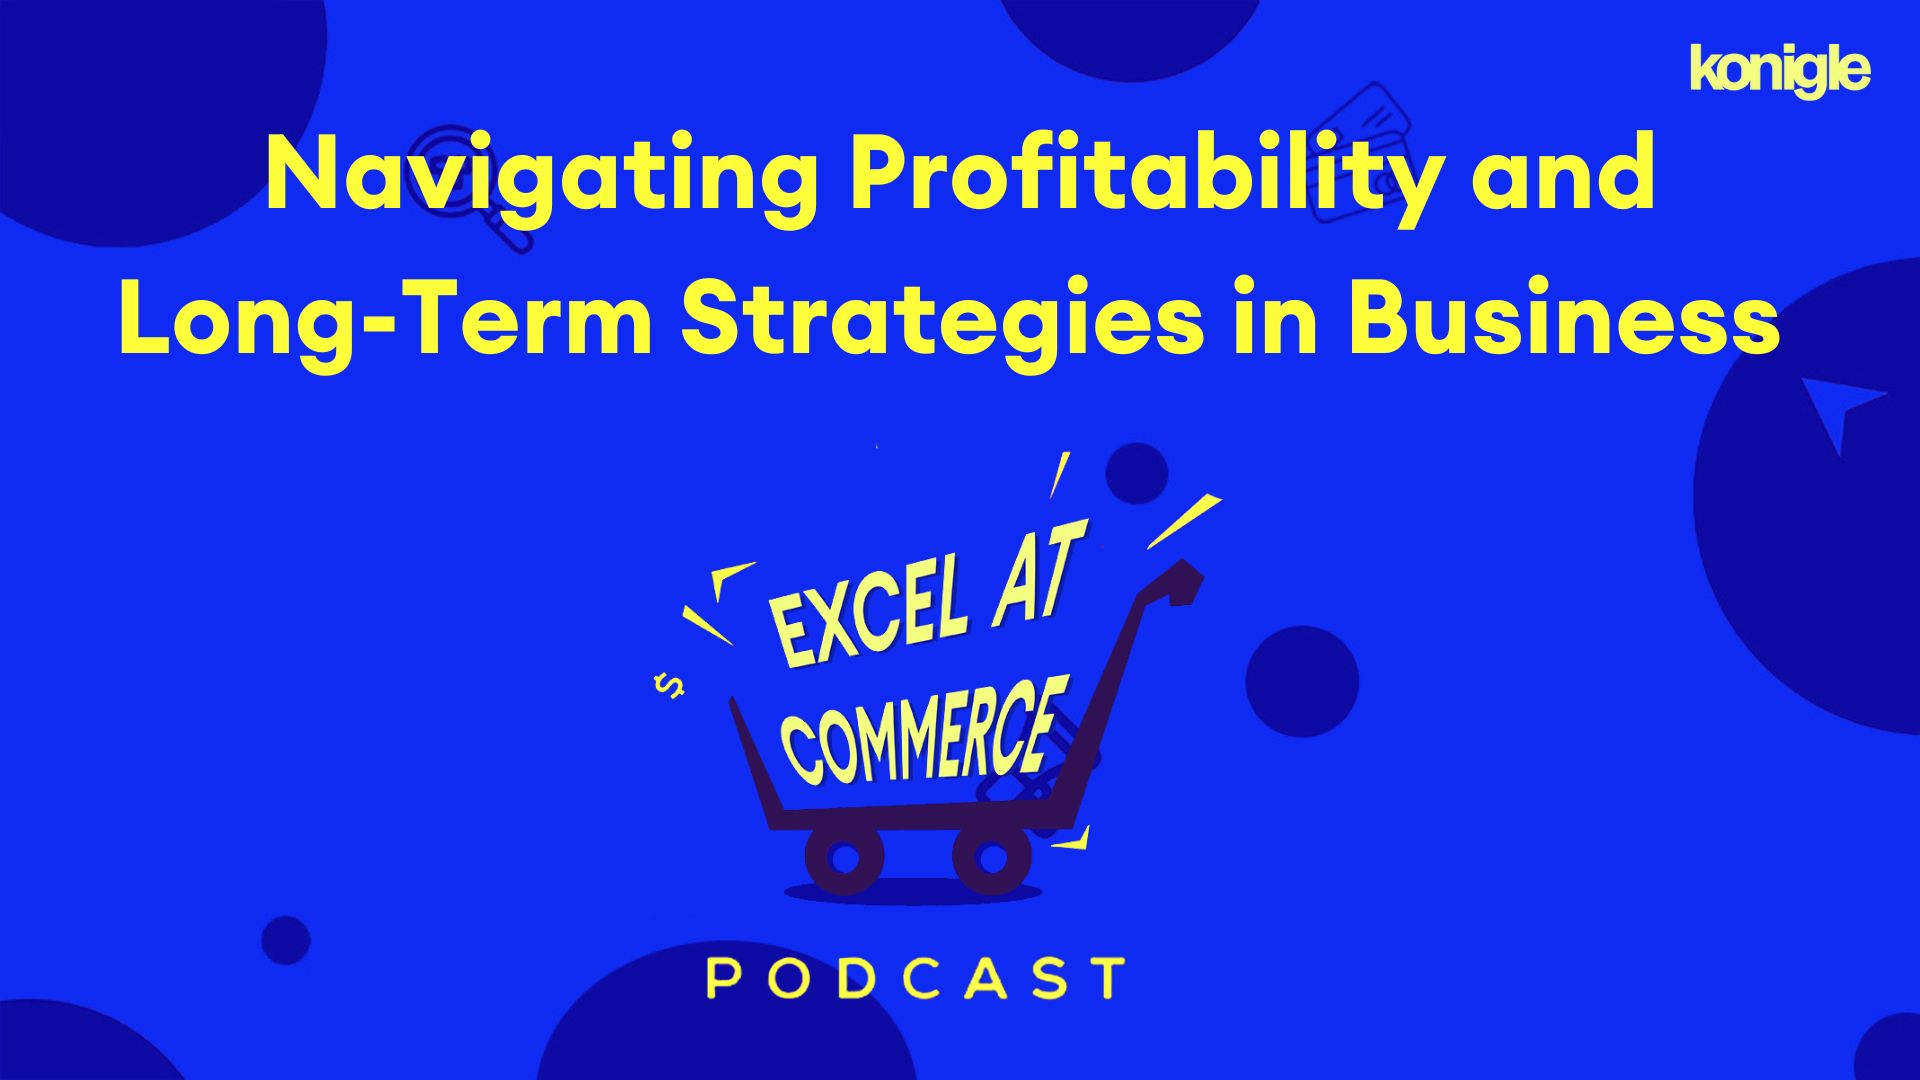 Navigating Profitability and Long-Term Strategies in Business